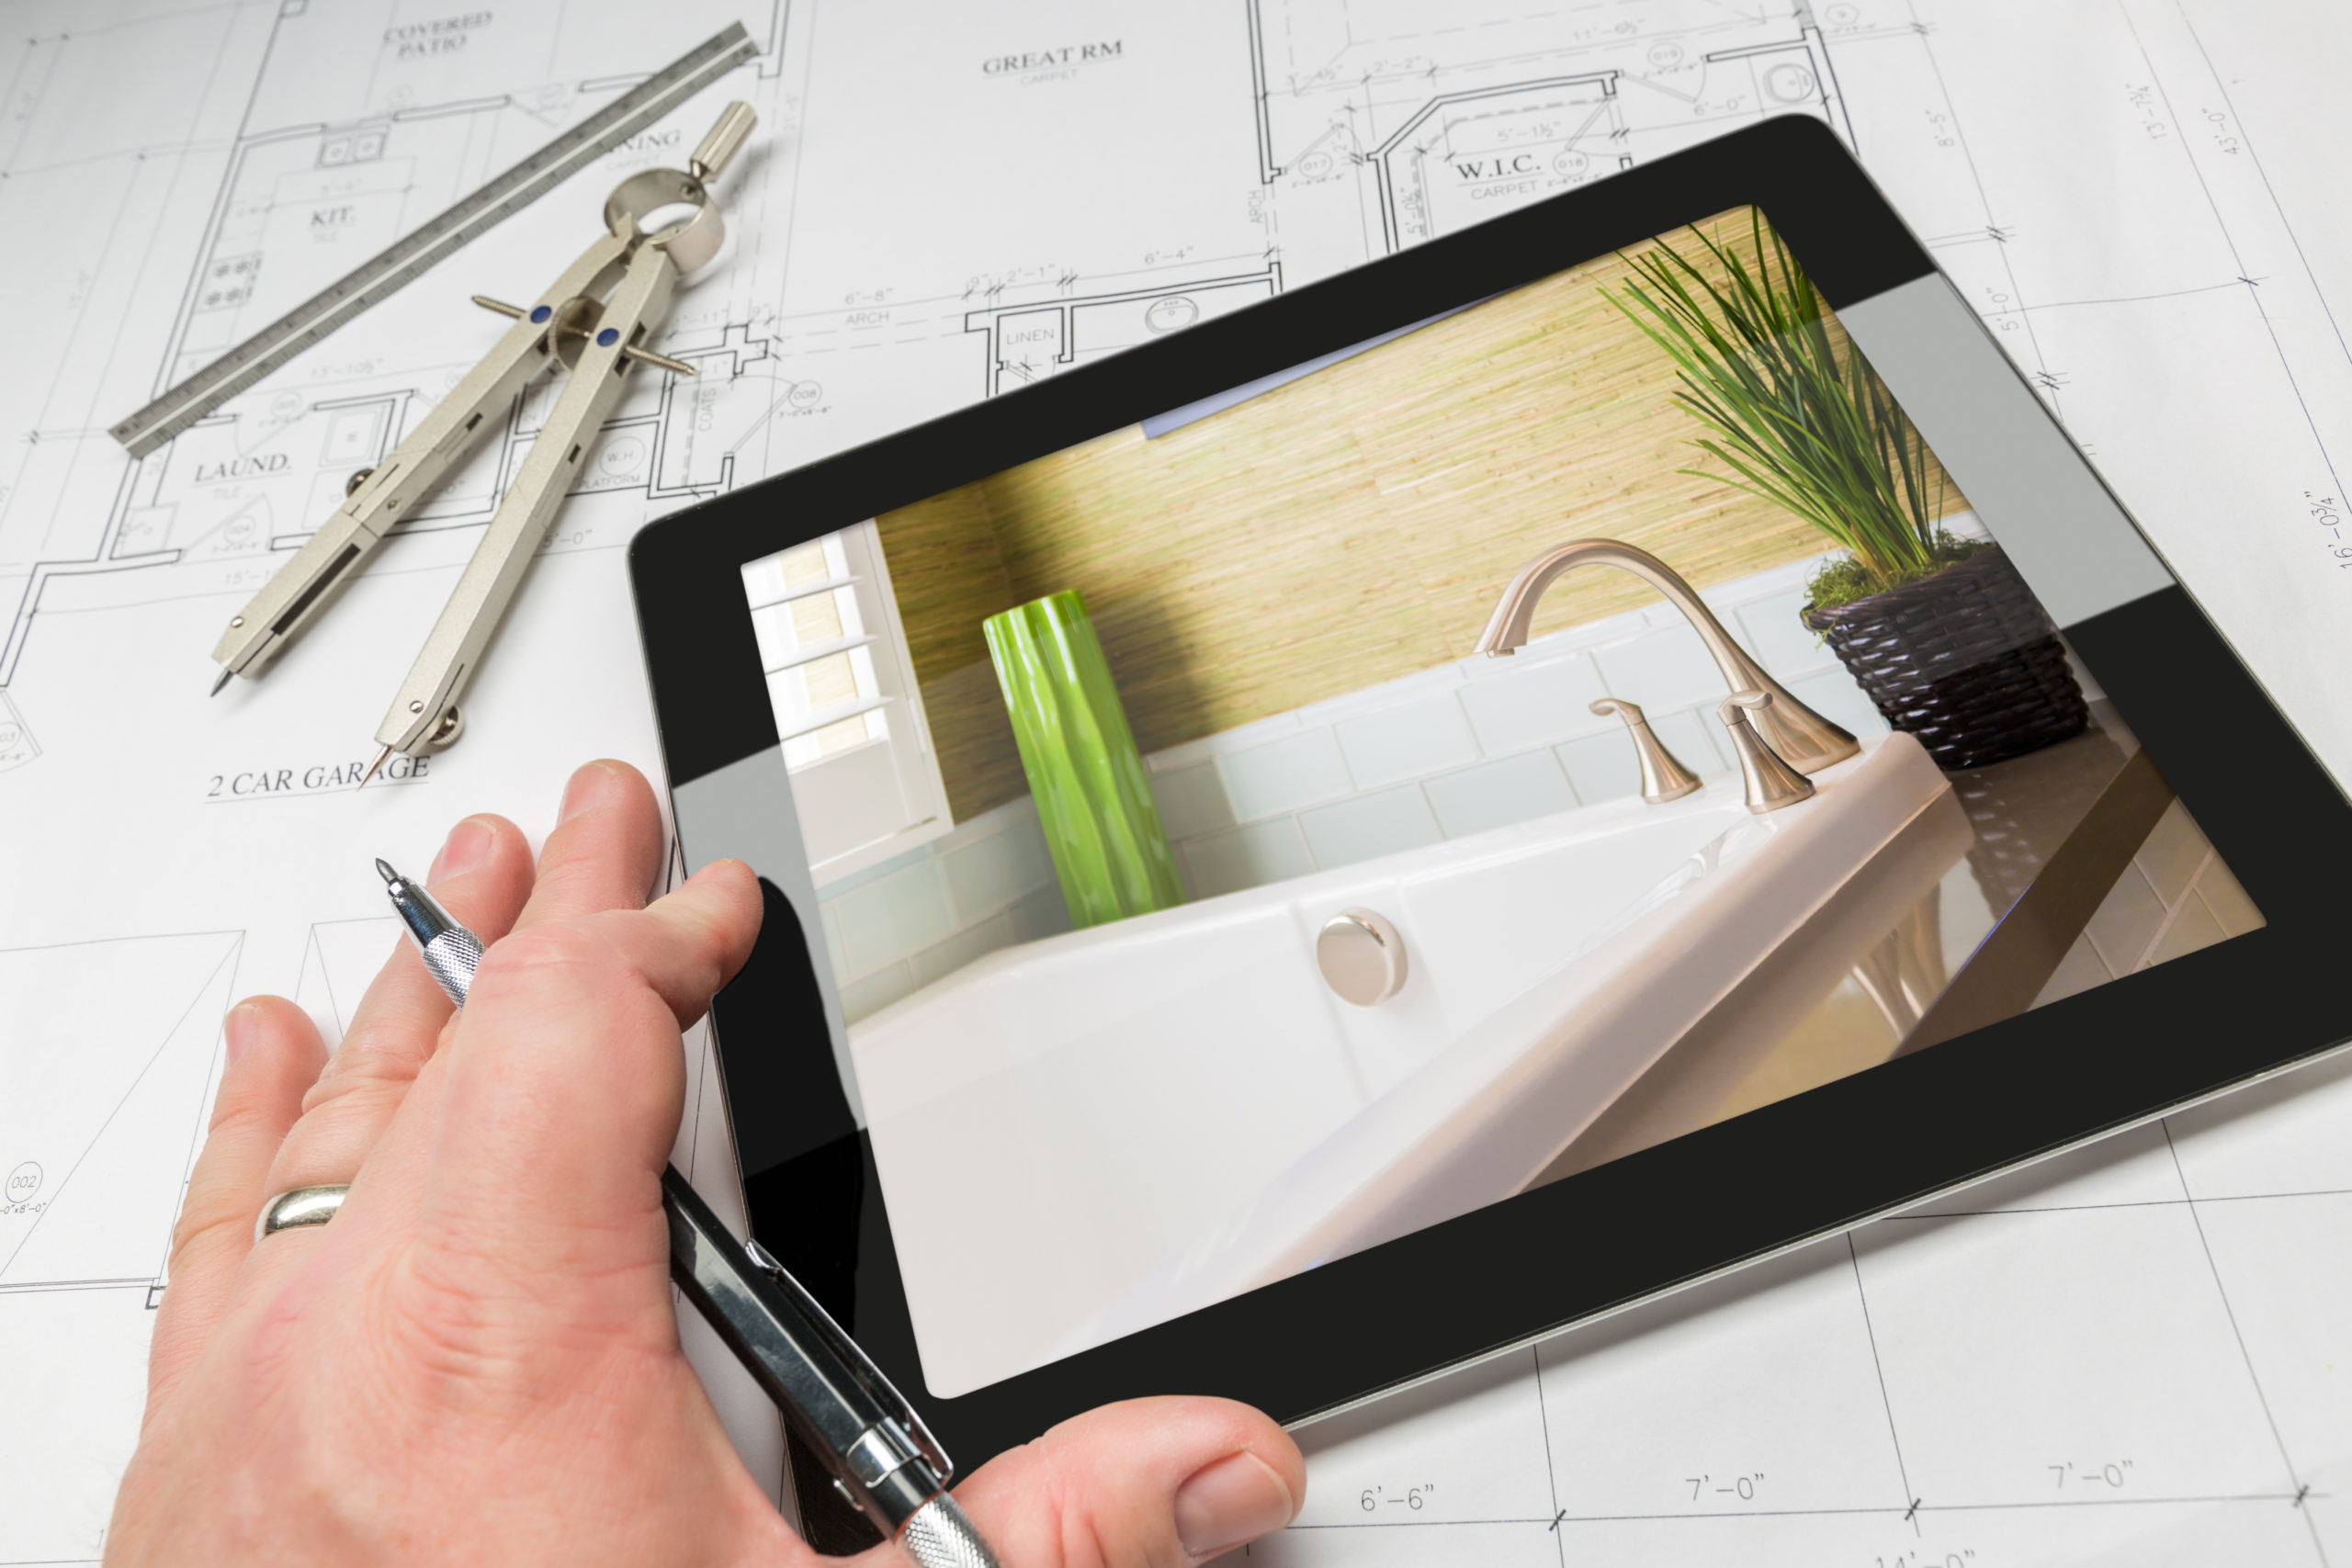 Hand of Architect on Computer Tablet Showing Luxury Bathroom Details Over House Plans, Compass and Ruler.